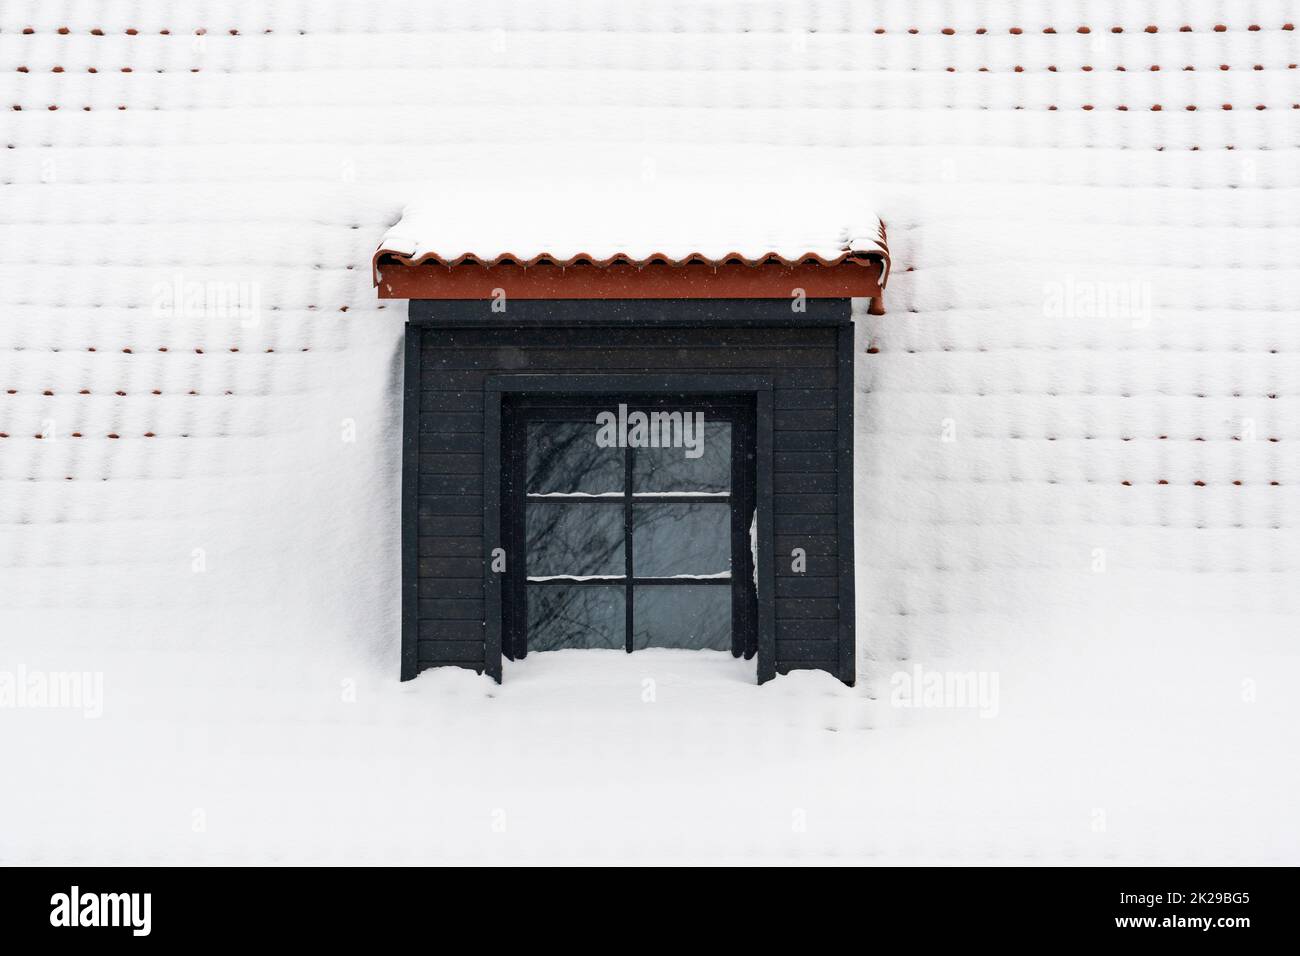 Dormer on a roof under fresh snow Stock Photo